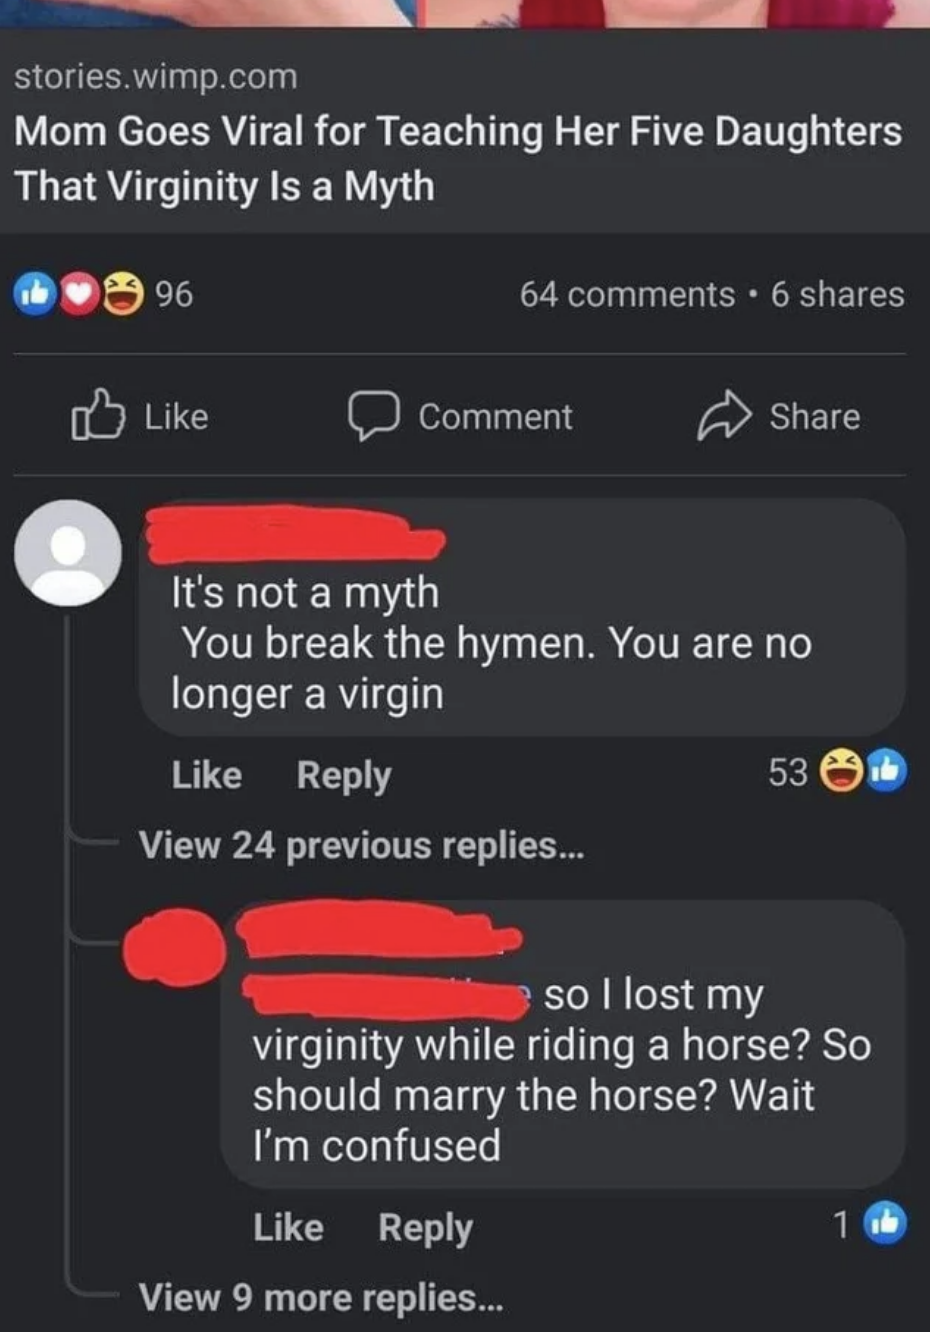 &quot;You break the hymen, you are no longer a virgin&quot;; response: &quot;So I lost my virginity while riding a horse? So should I marry the horse? I&#x27;m confused&quot;